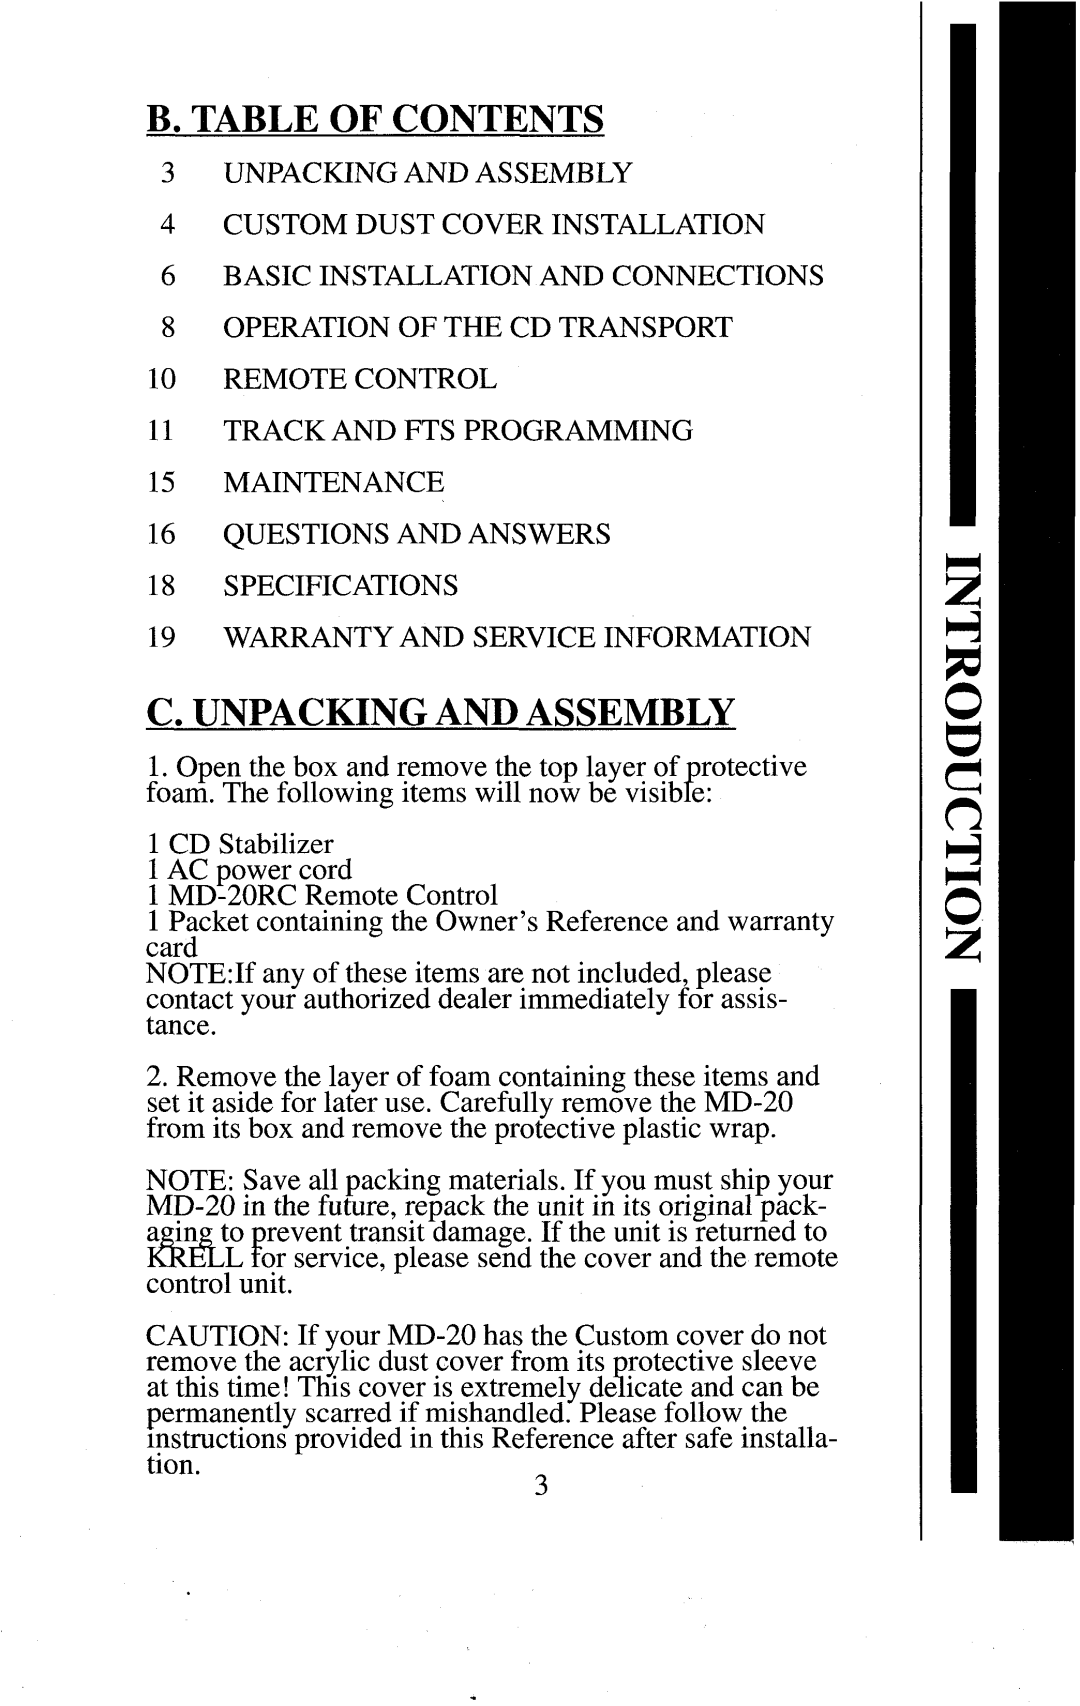 Krell Industries MD-20 manual B. Table Of Contents, C.Unpacking And Assembly 